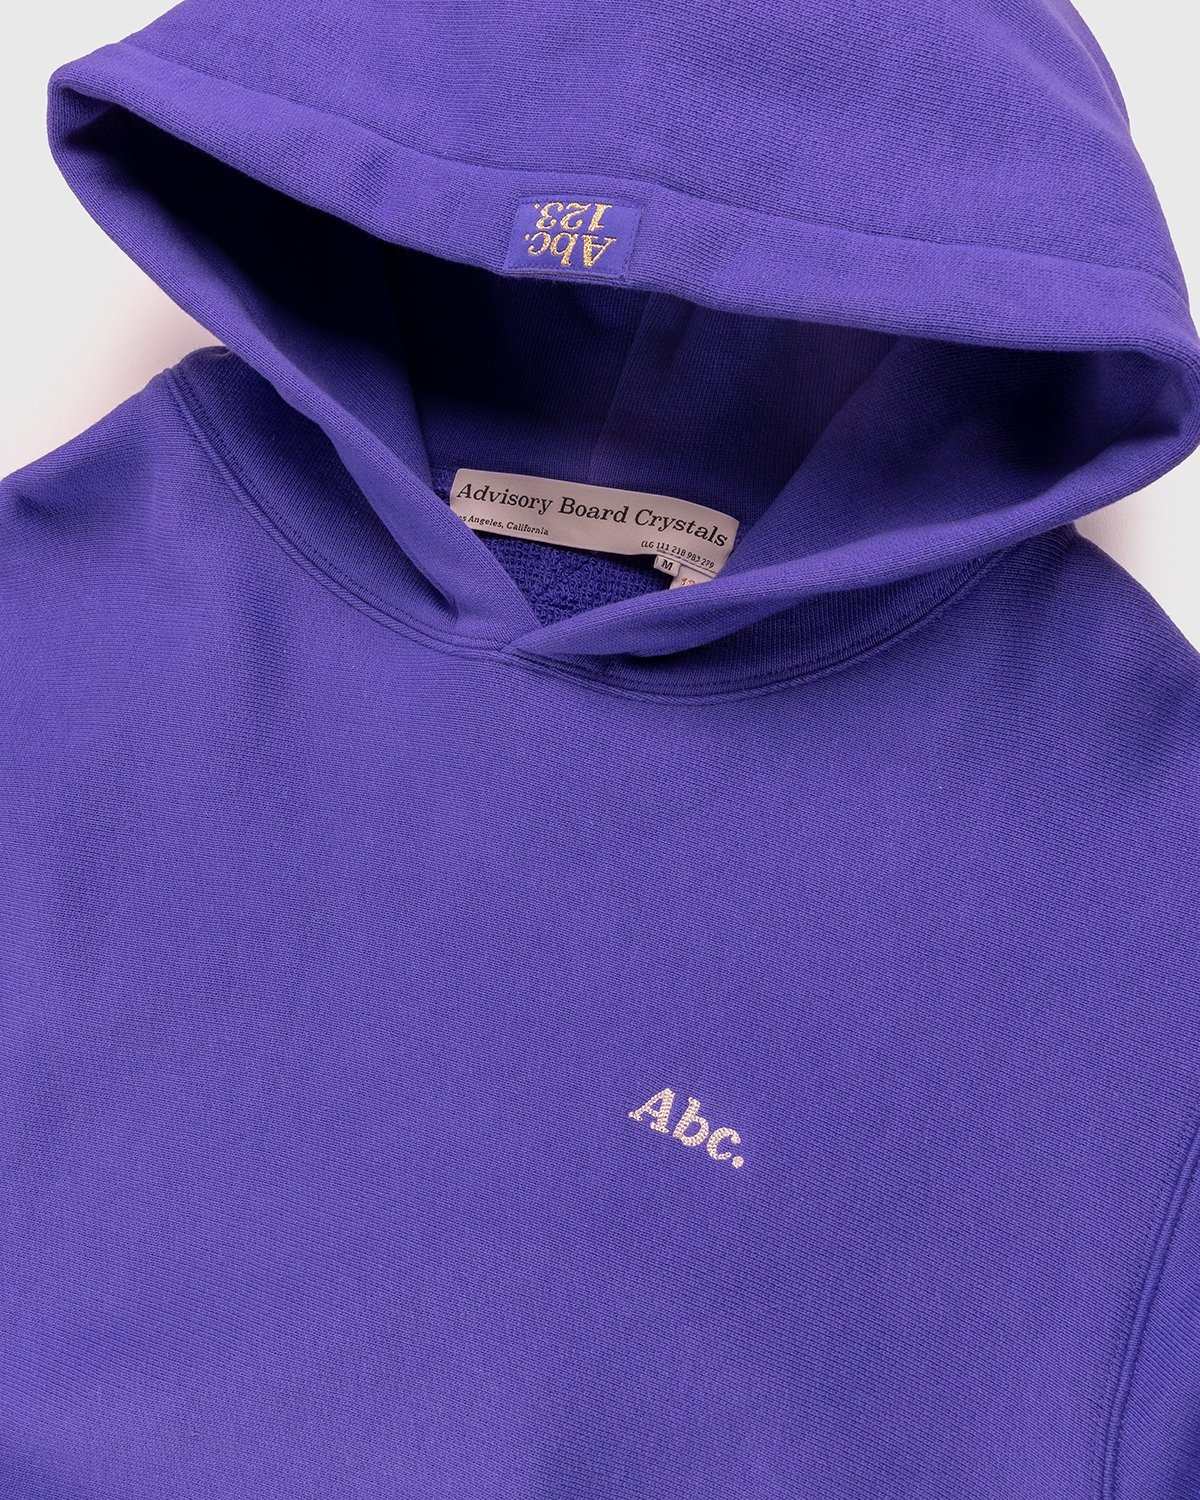 Abc. – Pullover Hoodie Sapphire - Sweats - Blue - Image 4